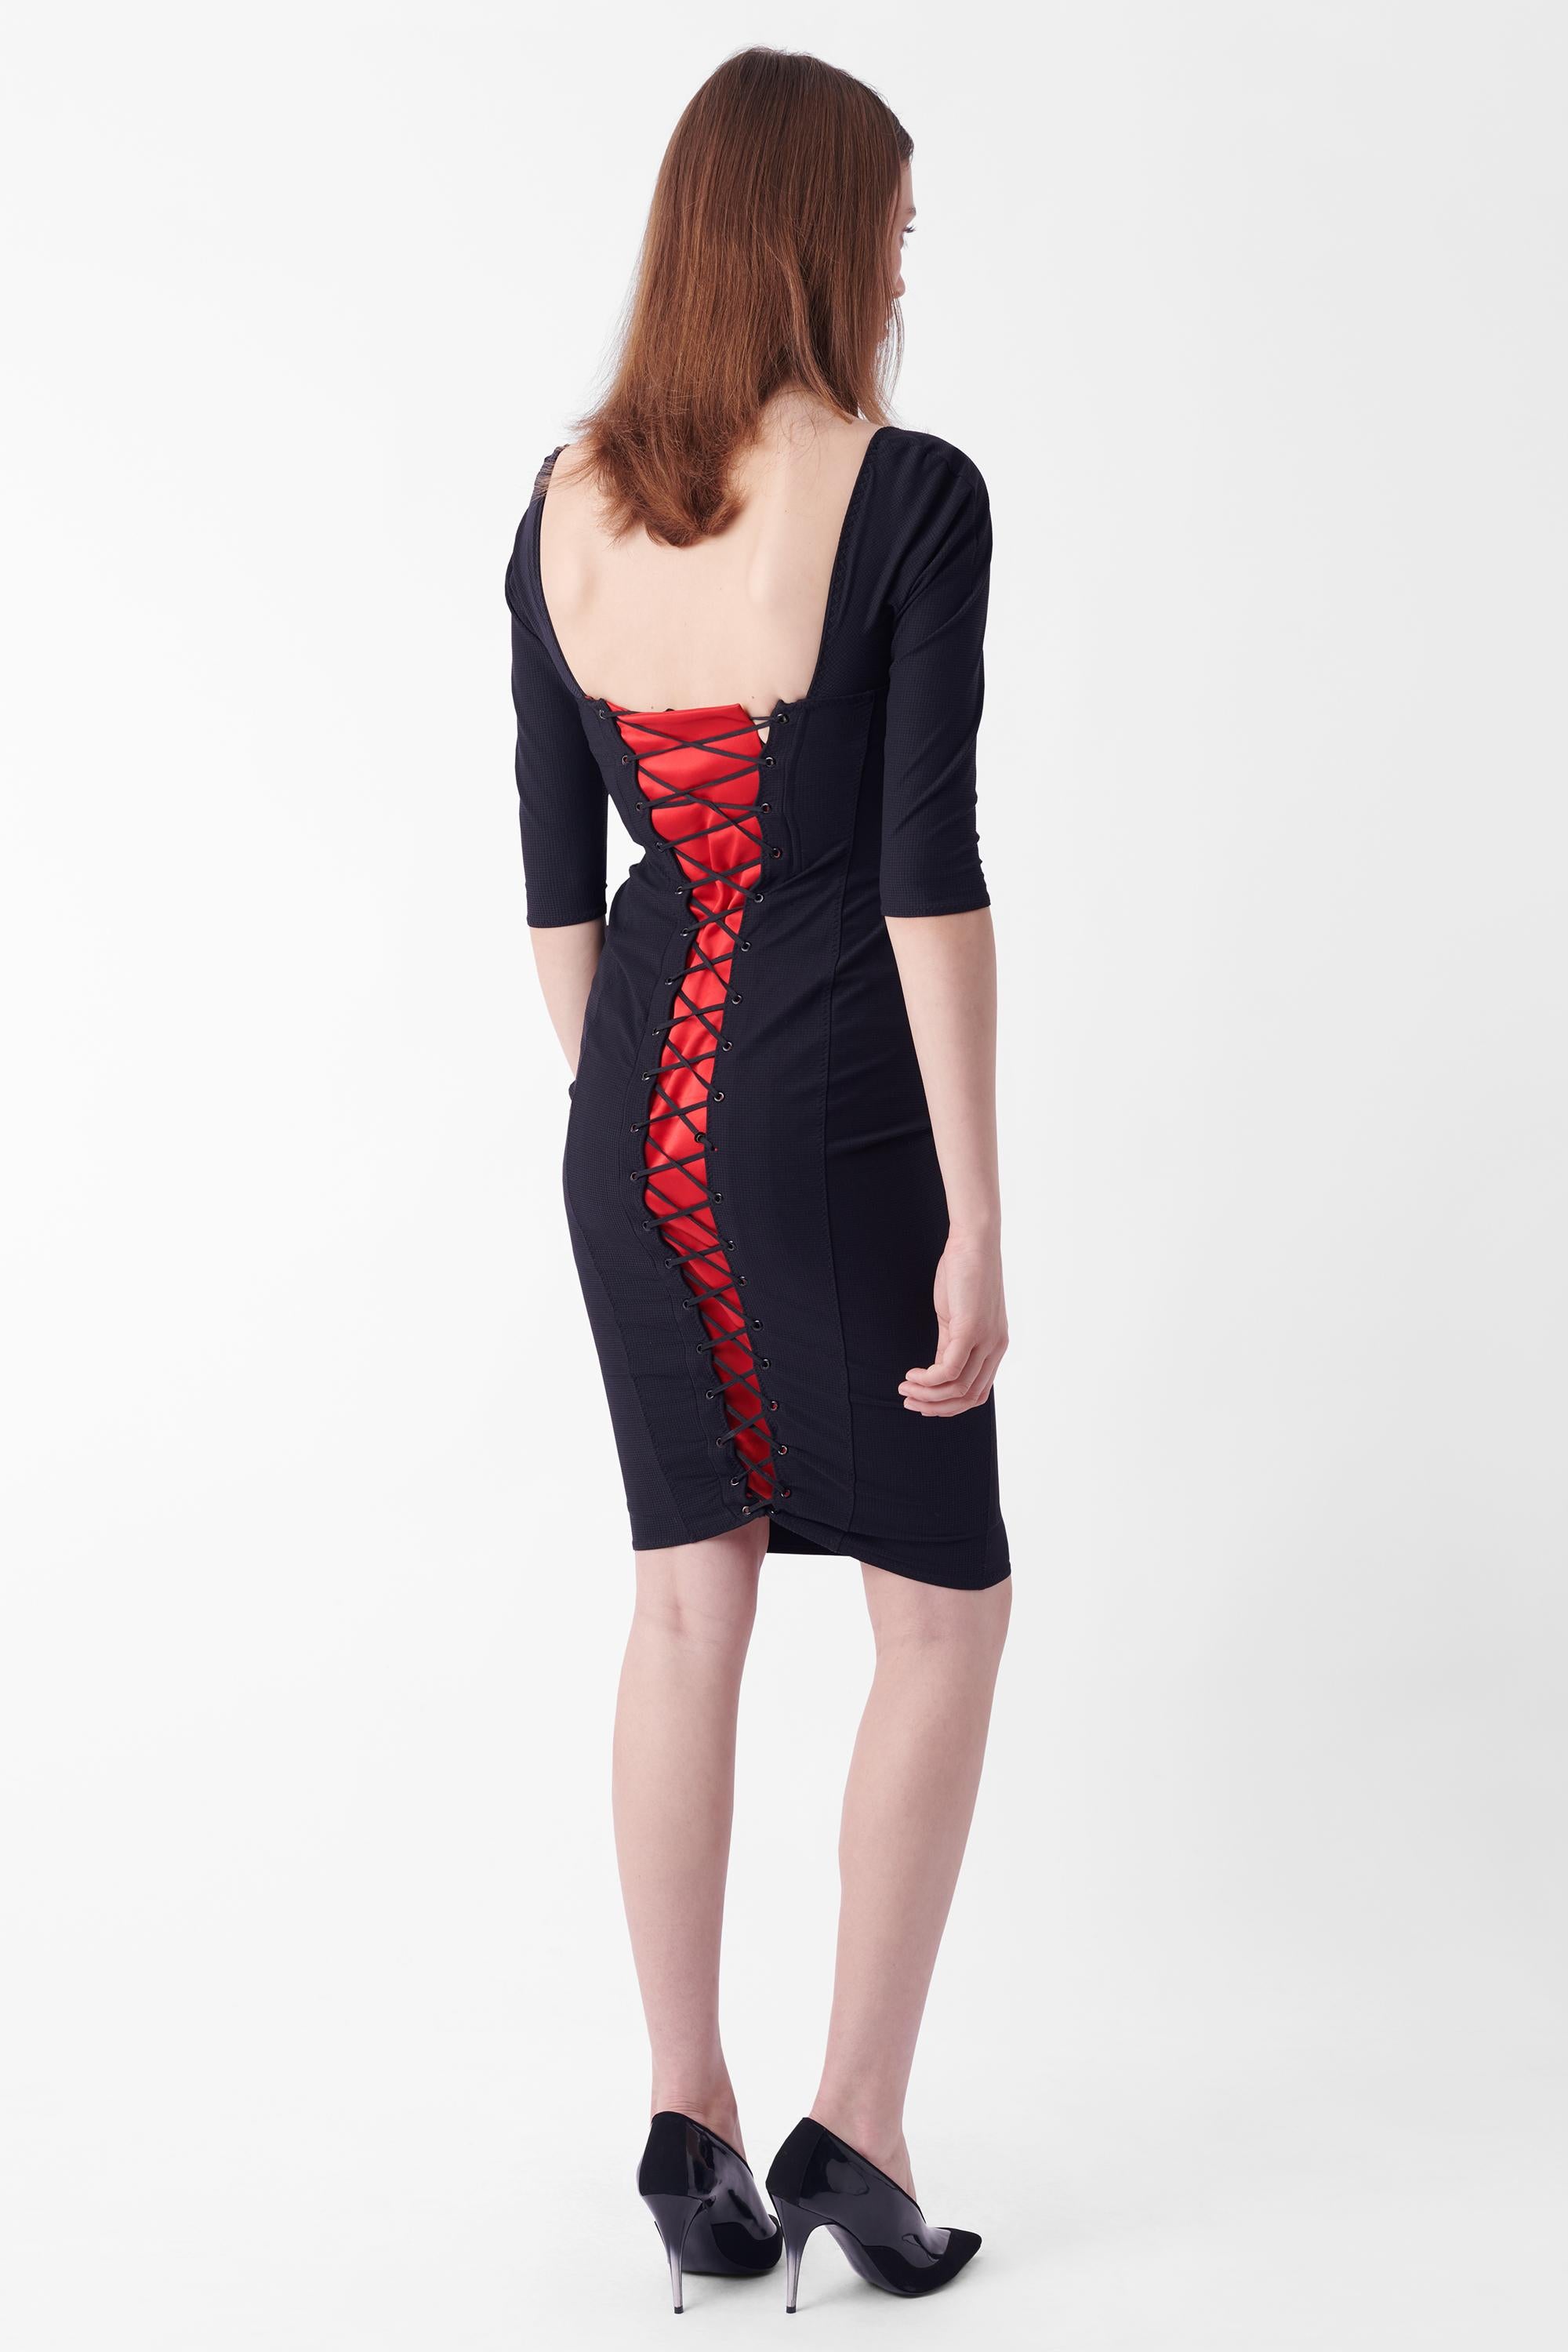 We are excited to present this Agent Provocateur Fall Winter 2011 iconic Thora dress. Features sweetheart cup detailing, cross front detailing, lace up back with red satin underlay in midi length. As seen in a number of campaigns. In excellent